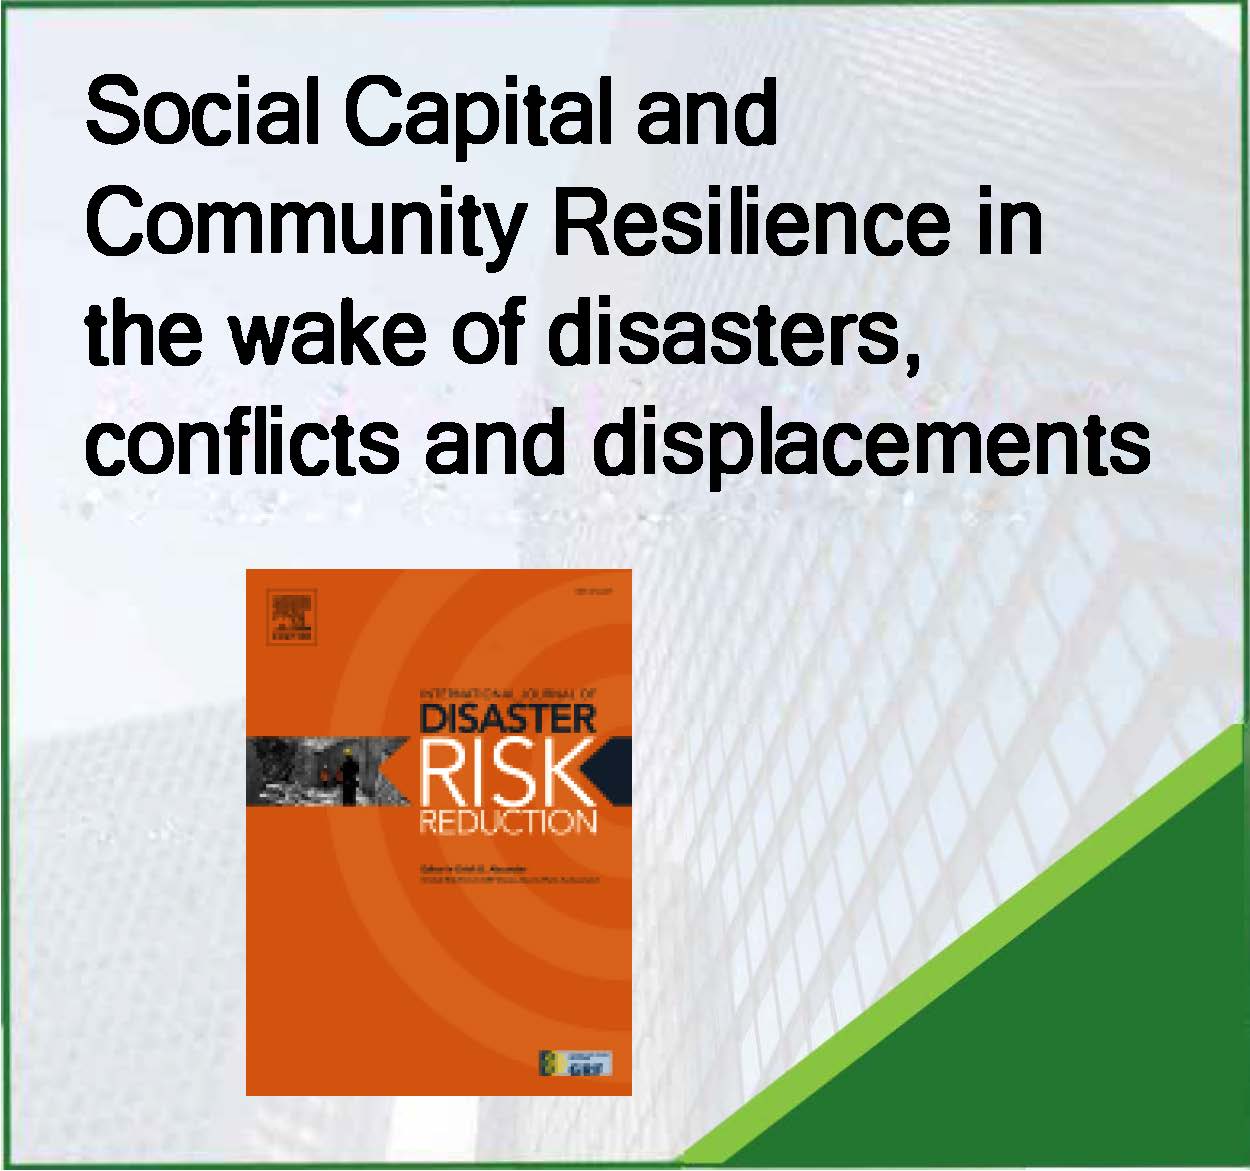 Social Capital and Community Resilience in the wake of disasters, conflicts and displacements